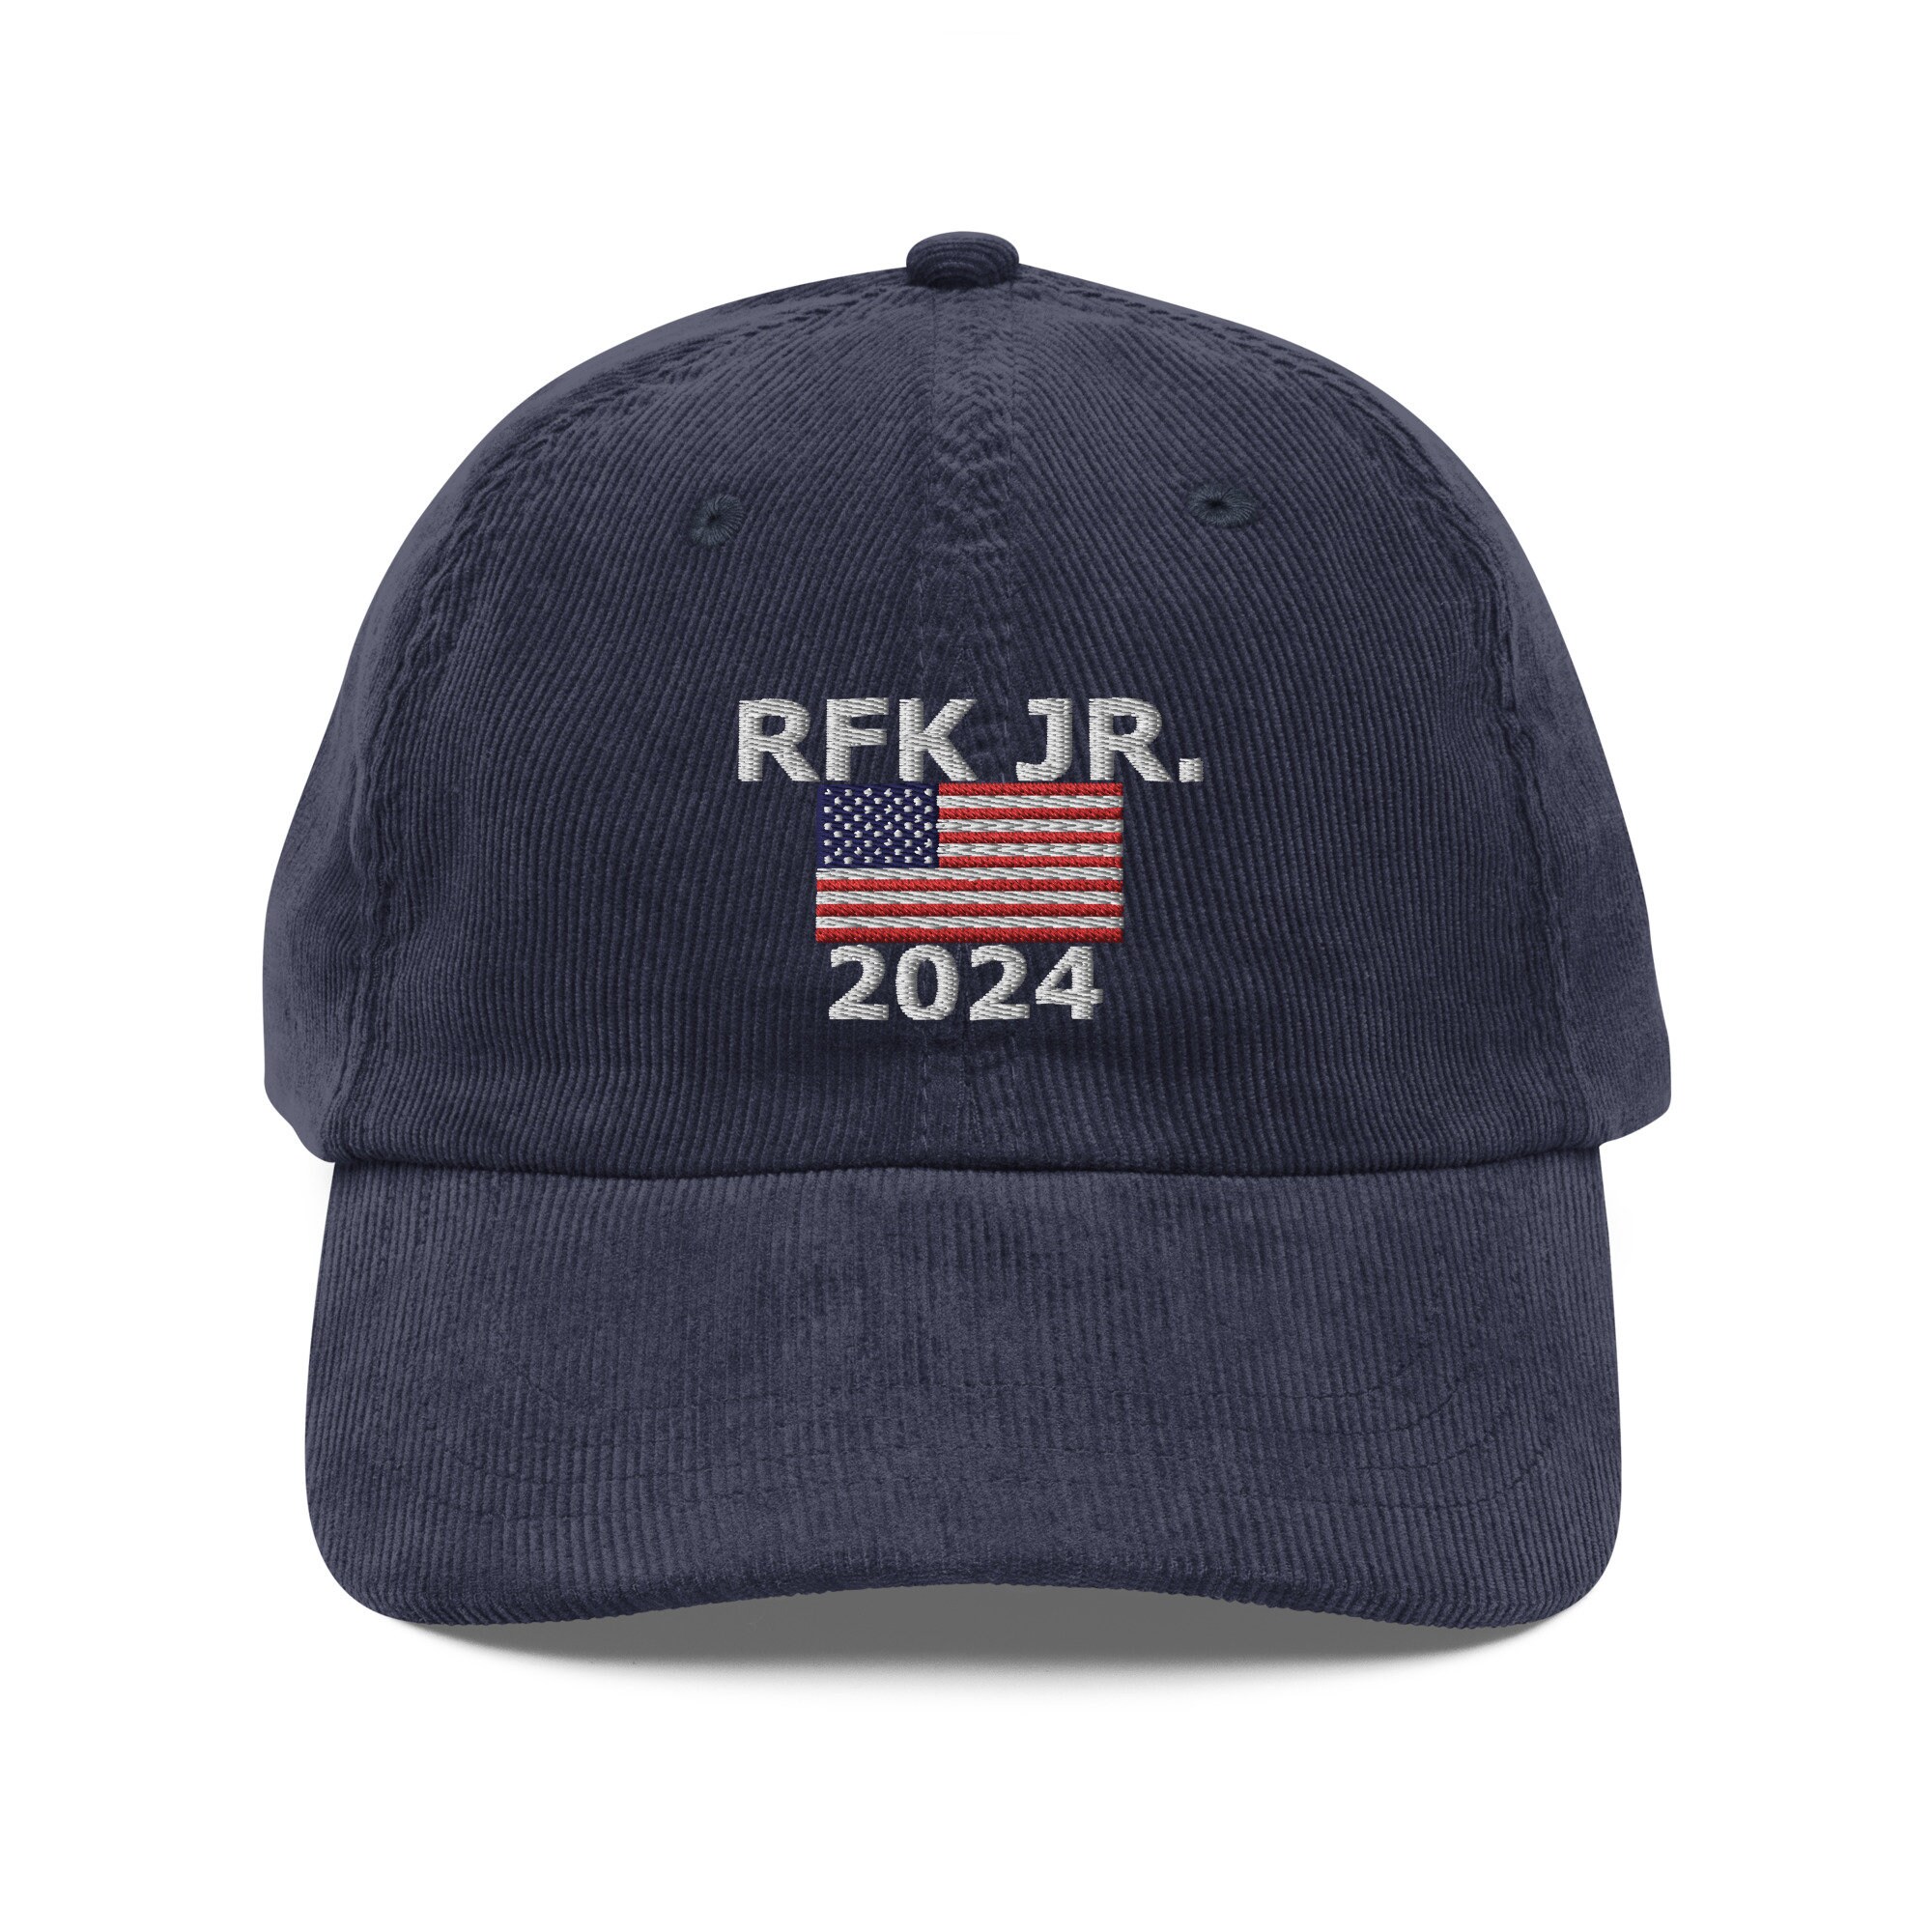 Kennedy 2024 Hat, Robert F Kennedy for President Embroidered Cap, Kennedy for America, Kennedy Family, 2024 Election Vintage Corduroy Cap